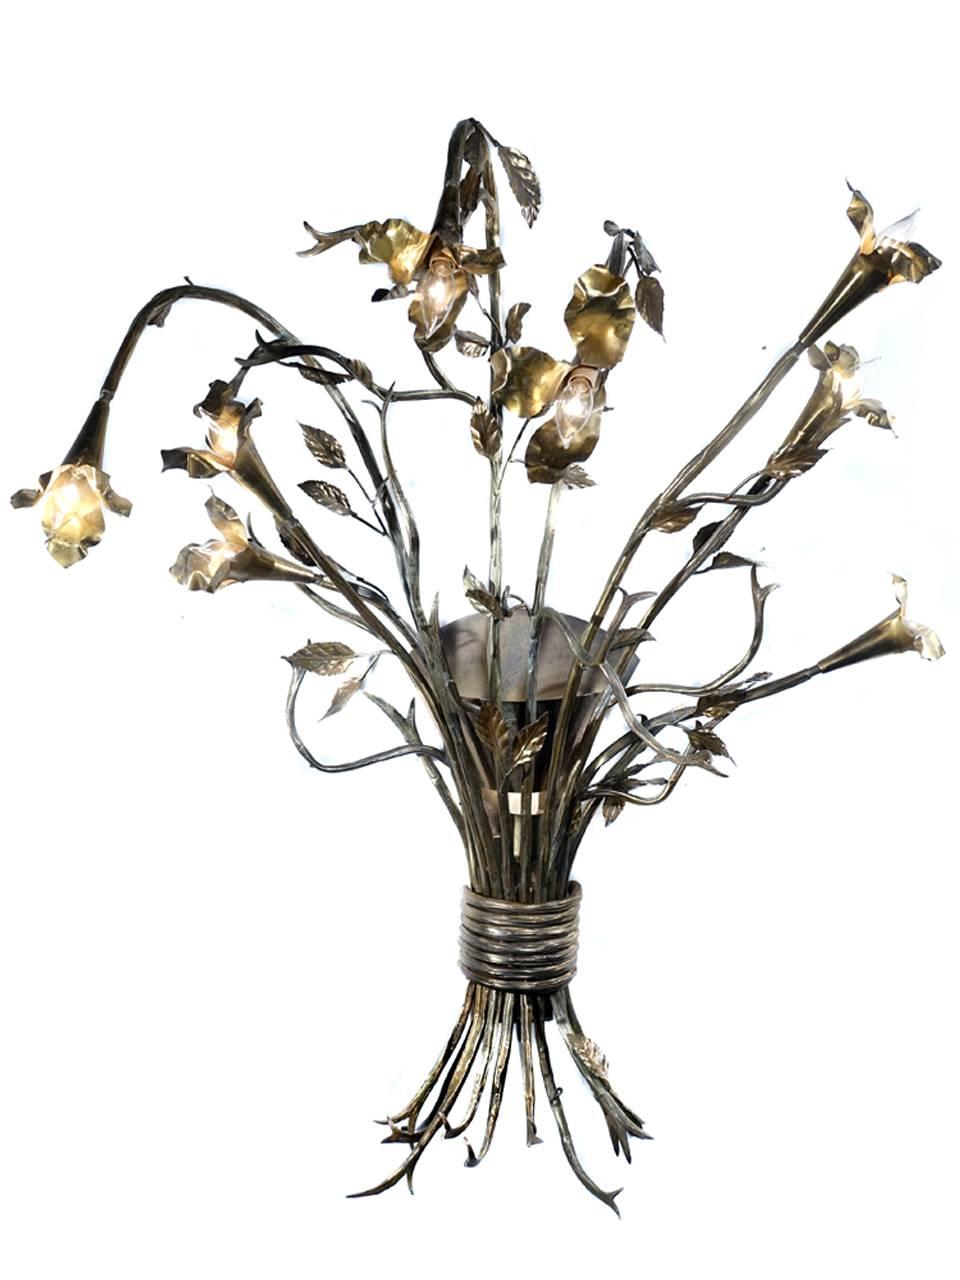 These larger than life sconces are measures over 40 inches tall and 3 foot wide. Each lamp has eight flowers with candelabra bulbs and a ninth back light at the center of the bouquet. It was quite a job but everything is now freshly rewired. These